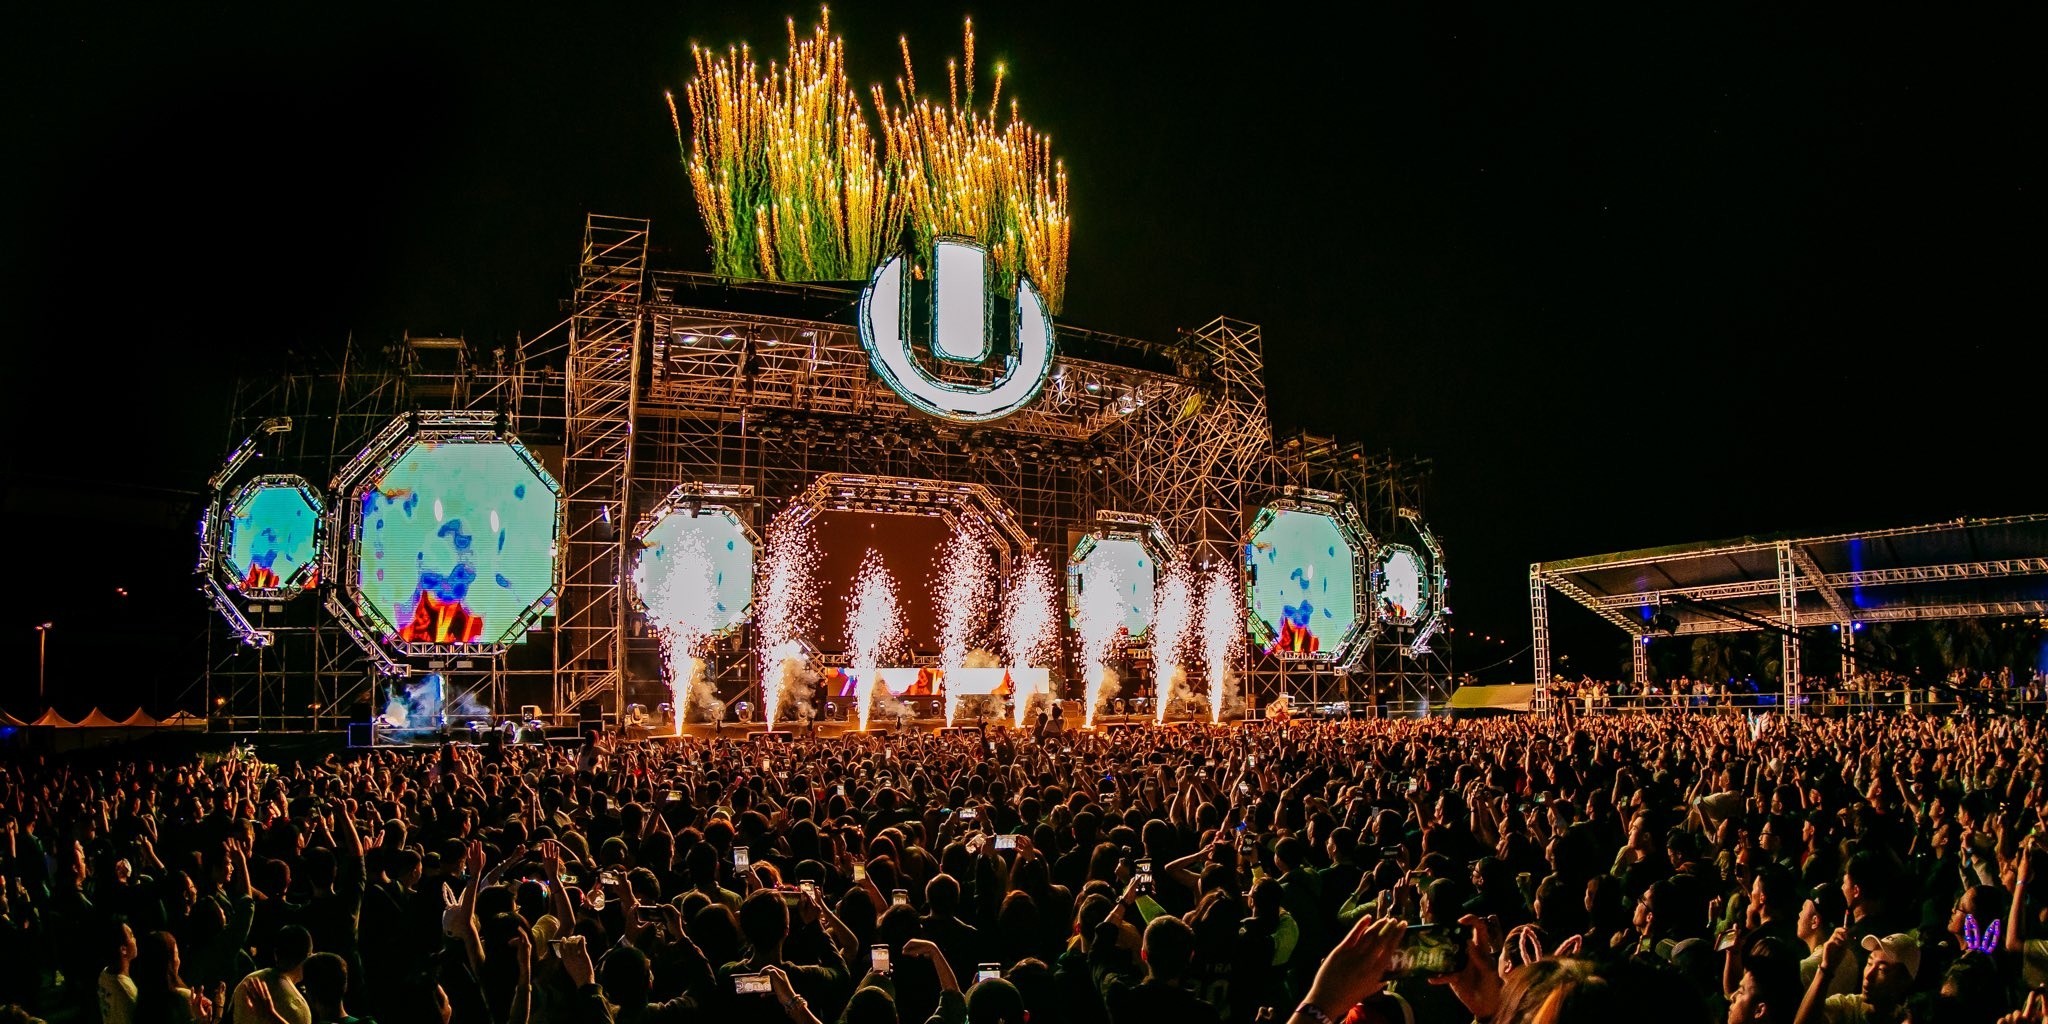 10,000 turn up for Ultra Music Festival 2020 in Taiwan, featuring Alesso, Kayzo, Slander, Vini Vici, and more – watch
